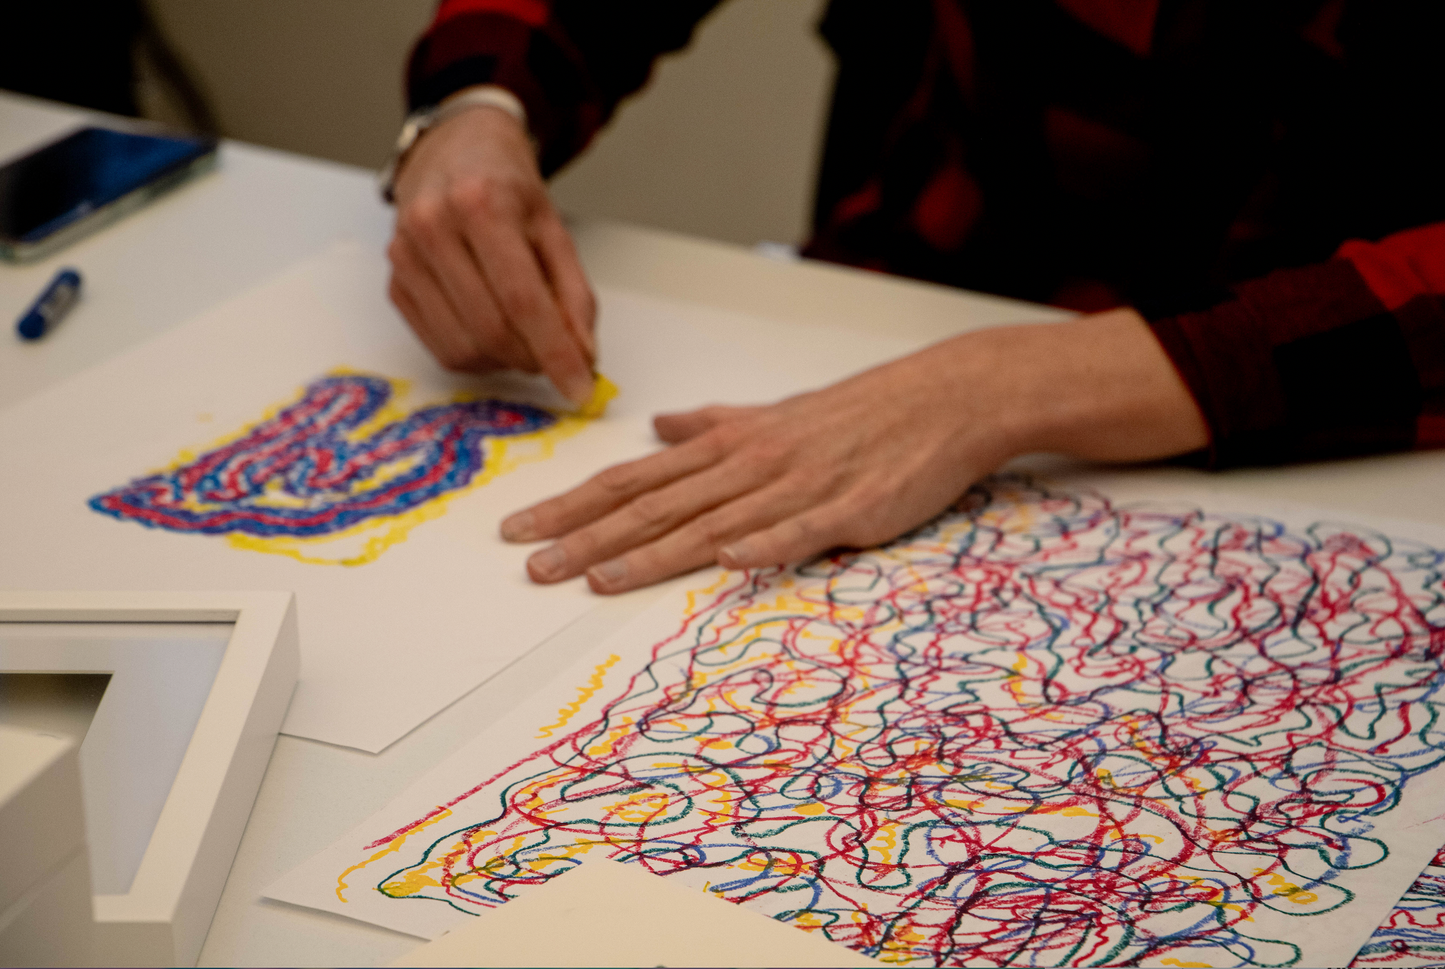 Mindful Drawing Ritual Workshop with Anne in Hamburg, Germany by subcultours